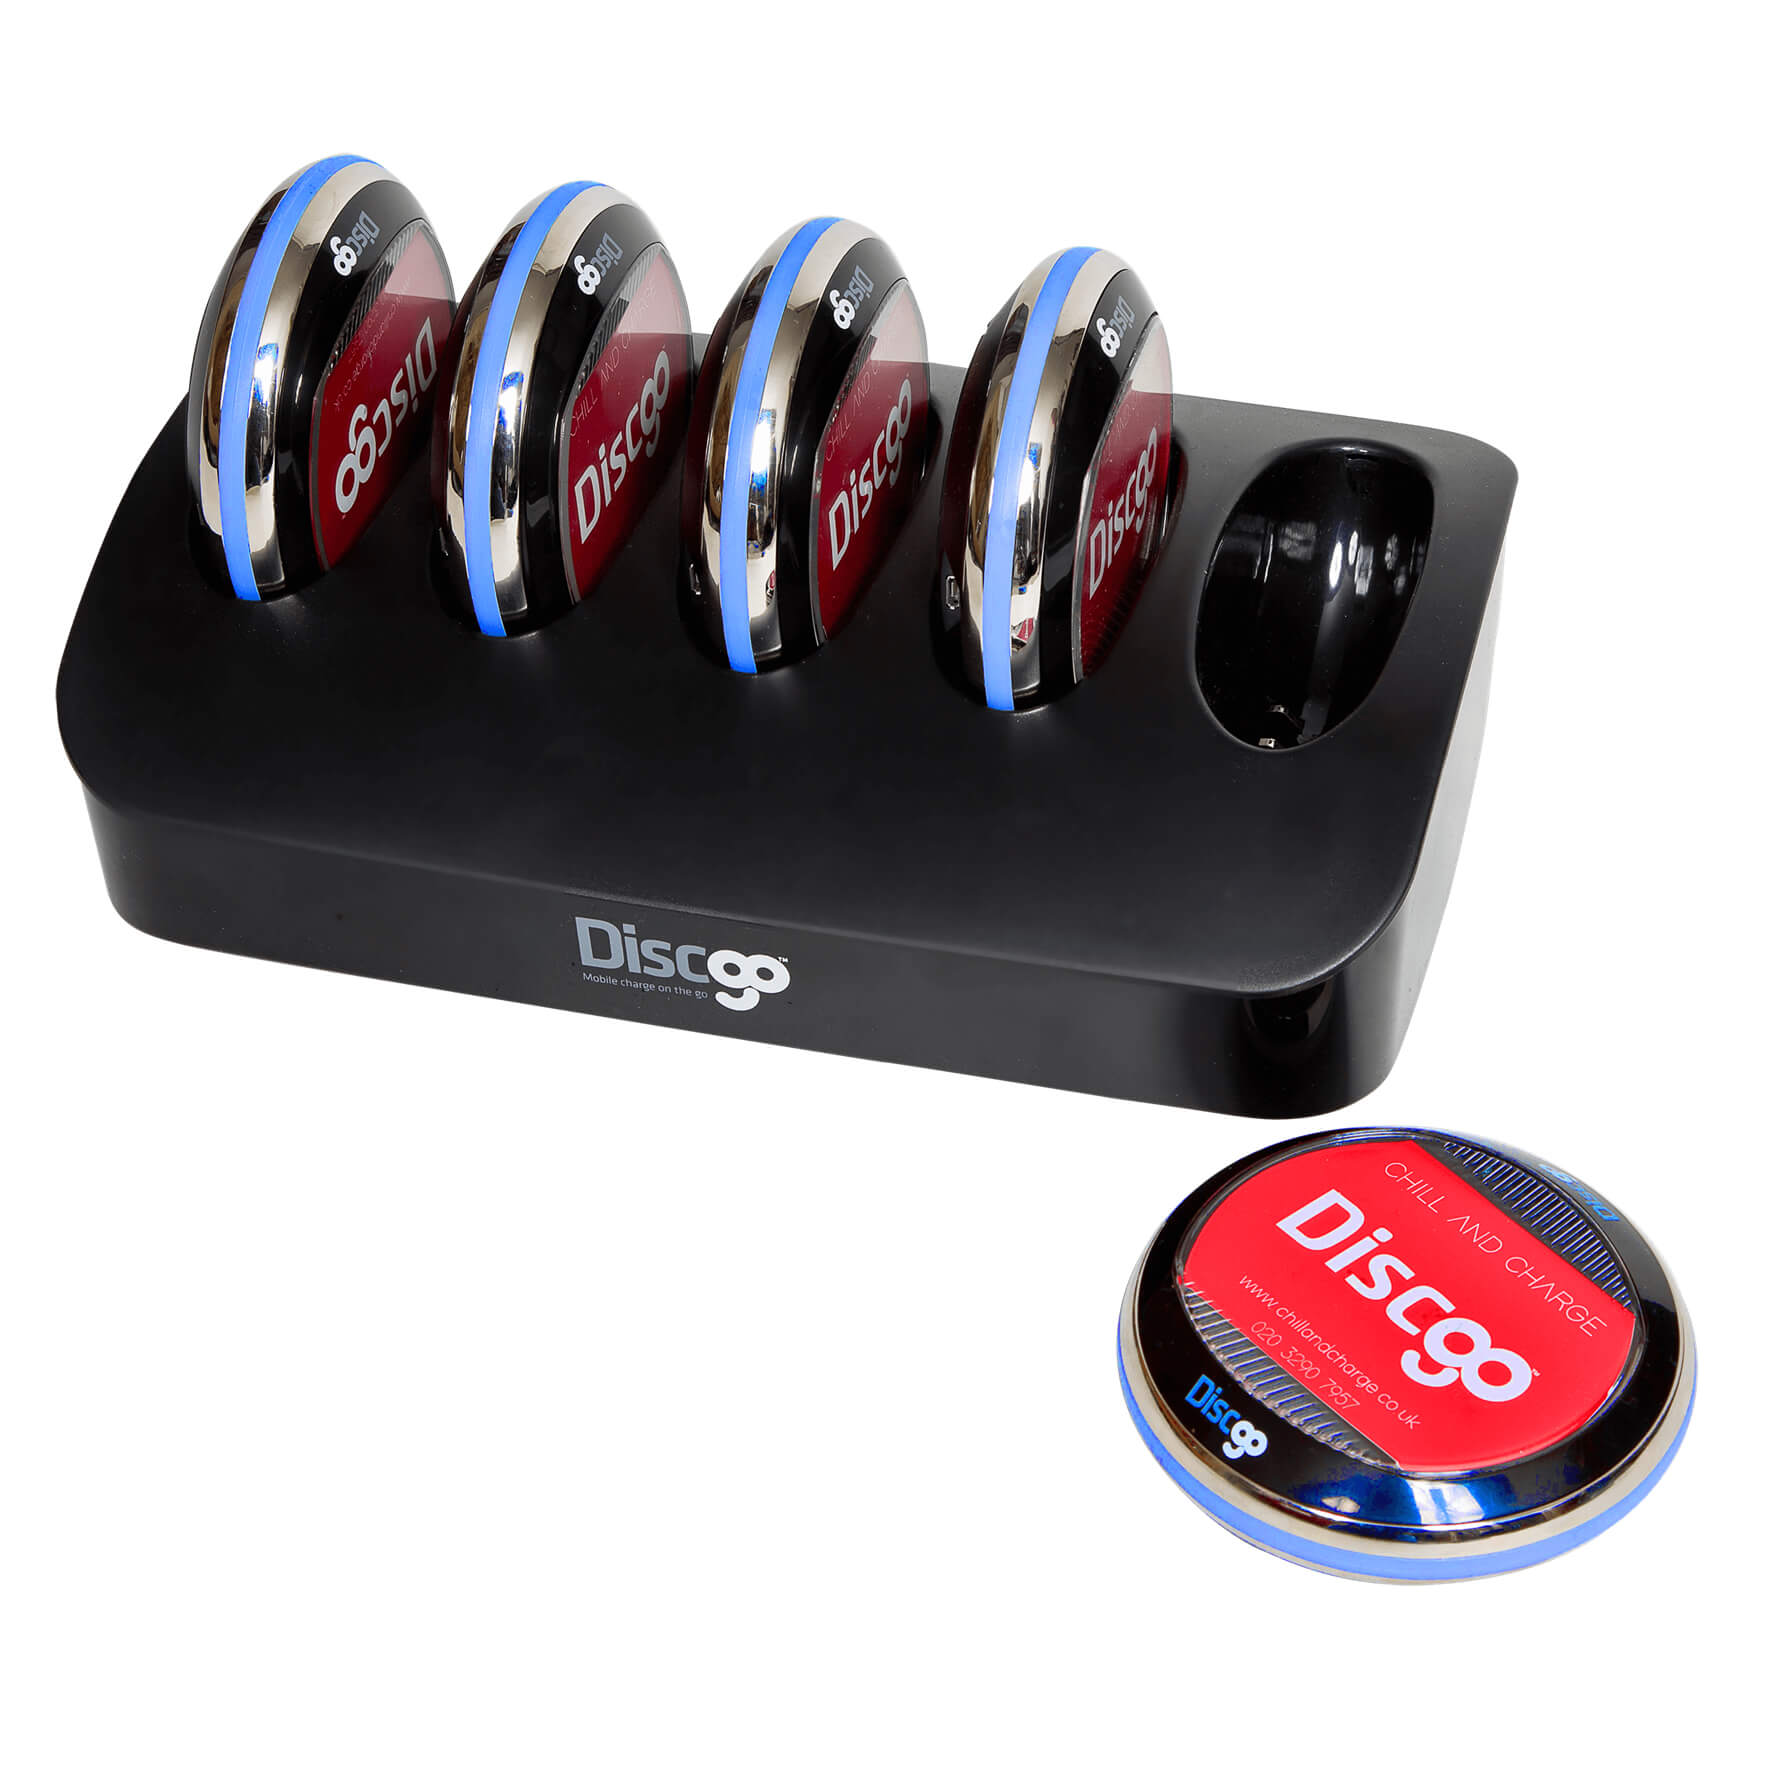 Discgo portable mobile device chargers